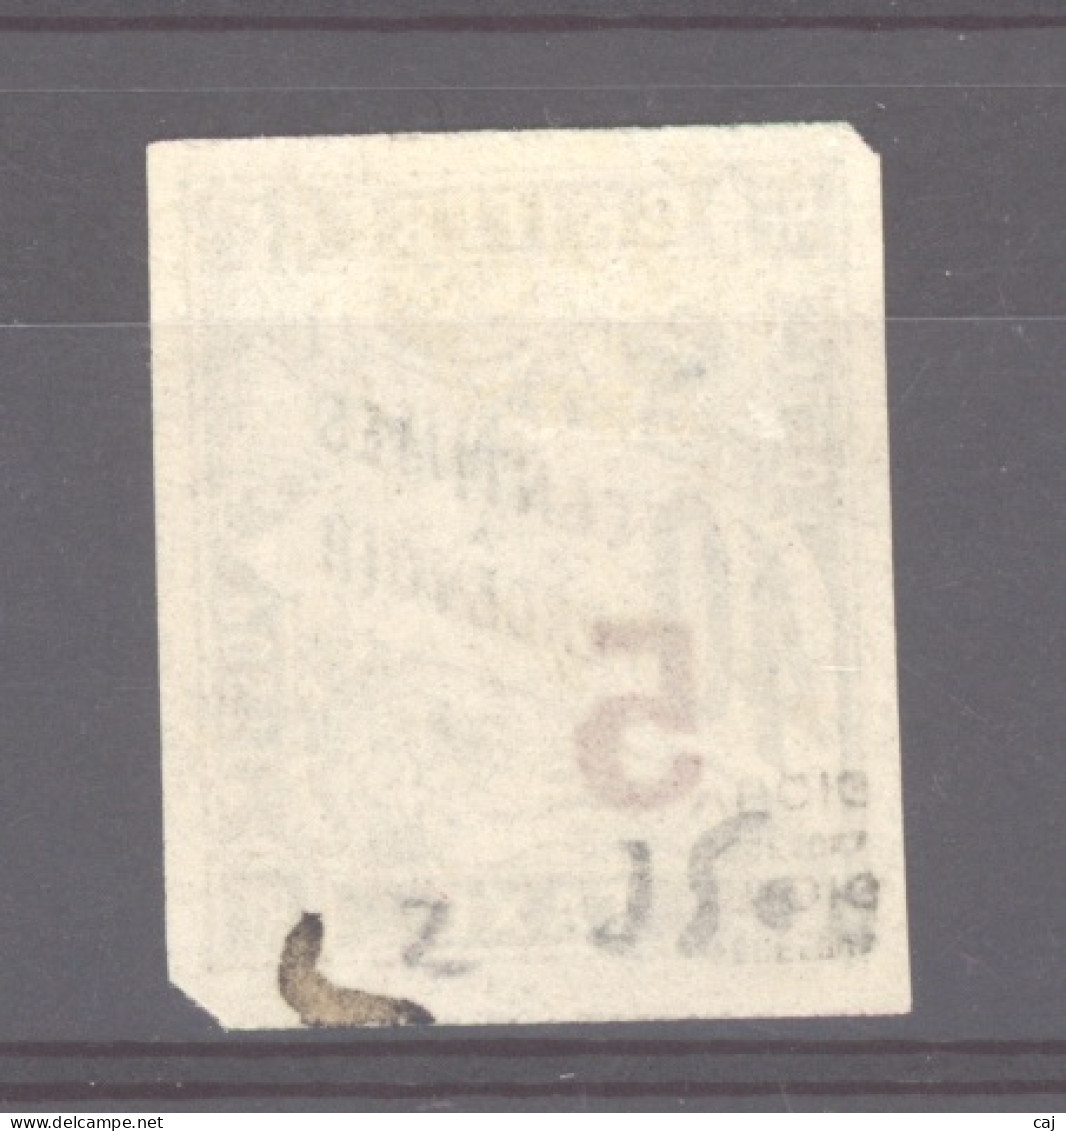 Indochine   -  Taxe  :  Yv  2  * - Postage Due